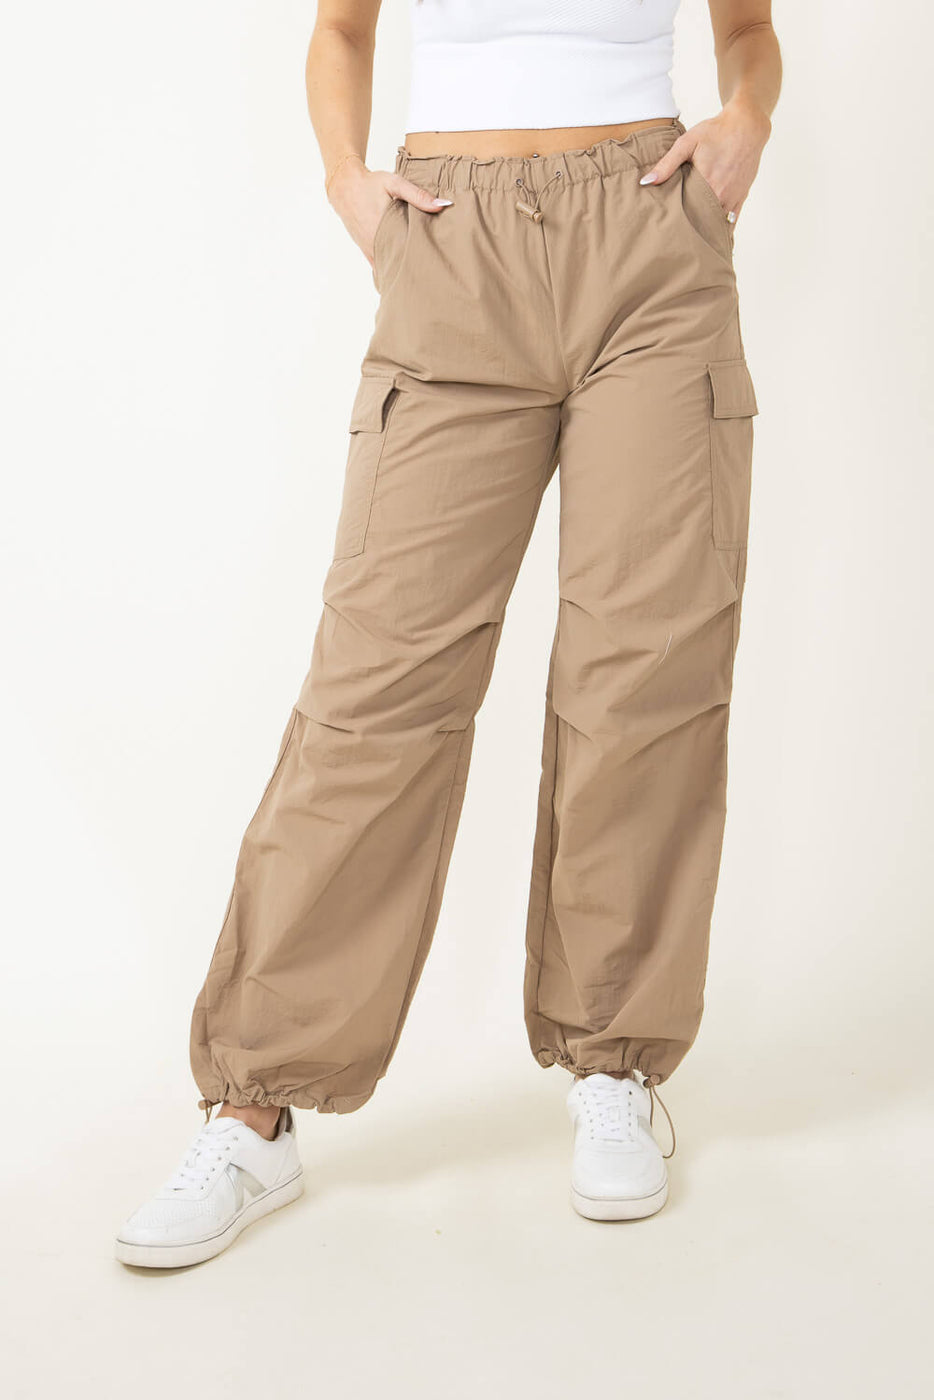 Love Tree Loose Fit Parachute Cargo Pants - Dark Green M - 42 requests